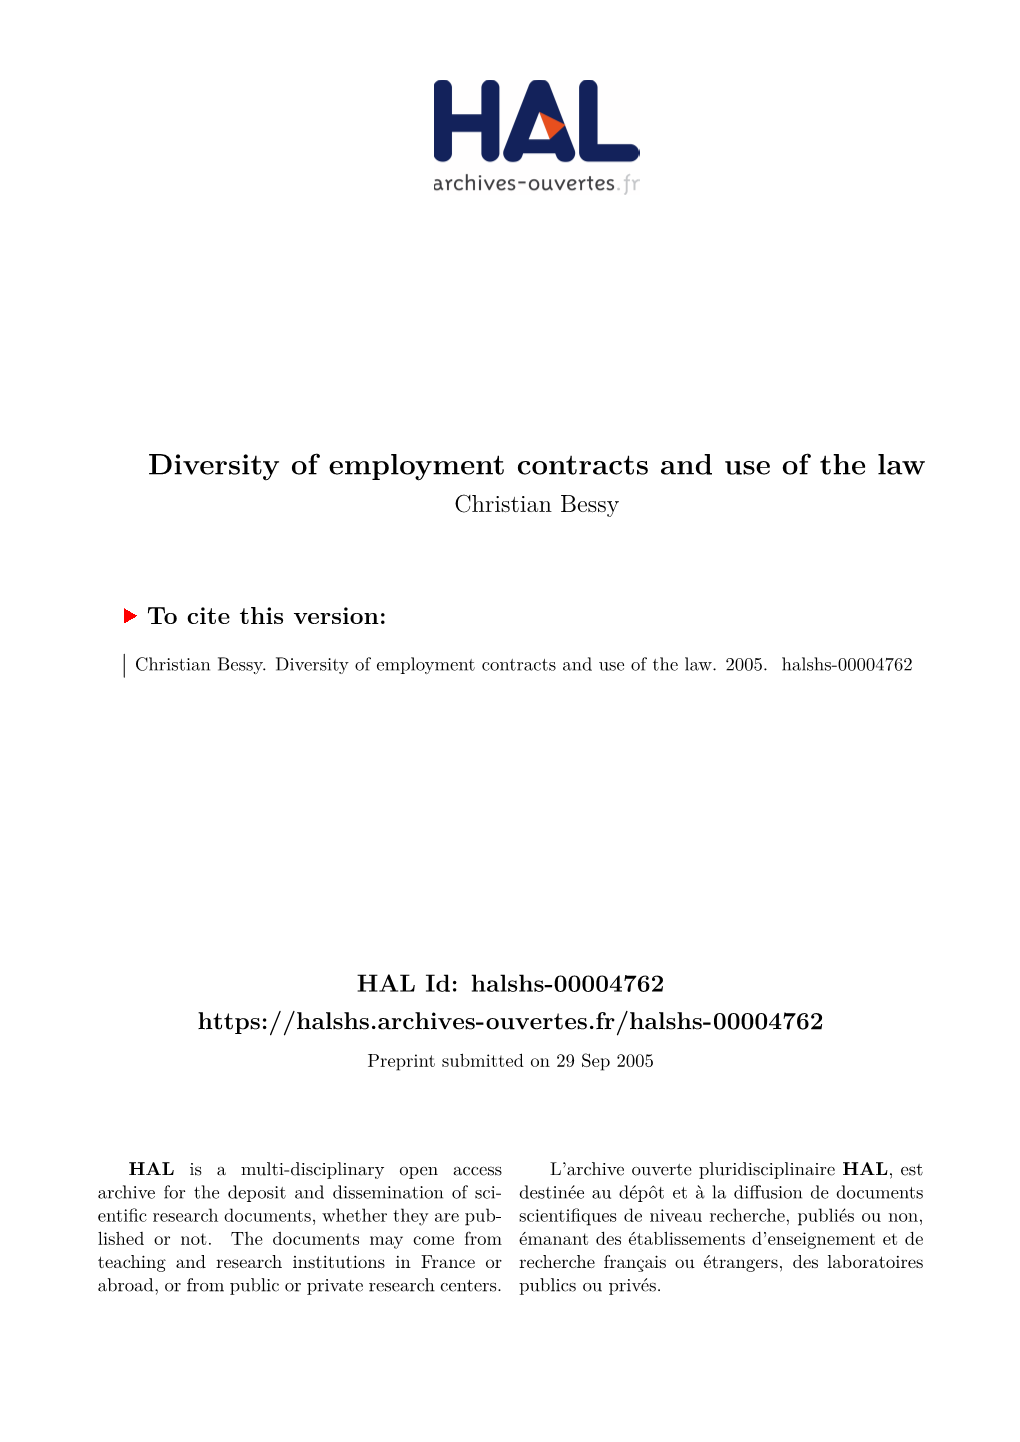 Diversity of Employment Contracts and Use of the Law Christian Bessy